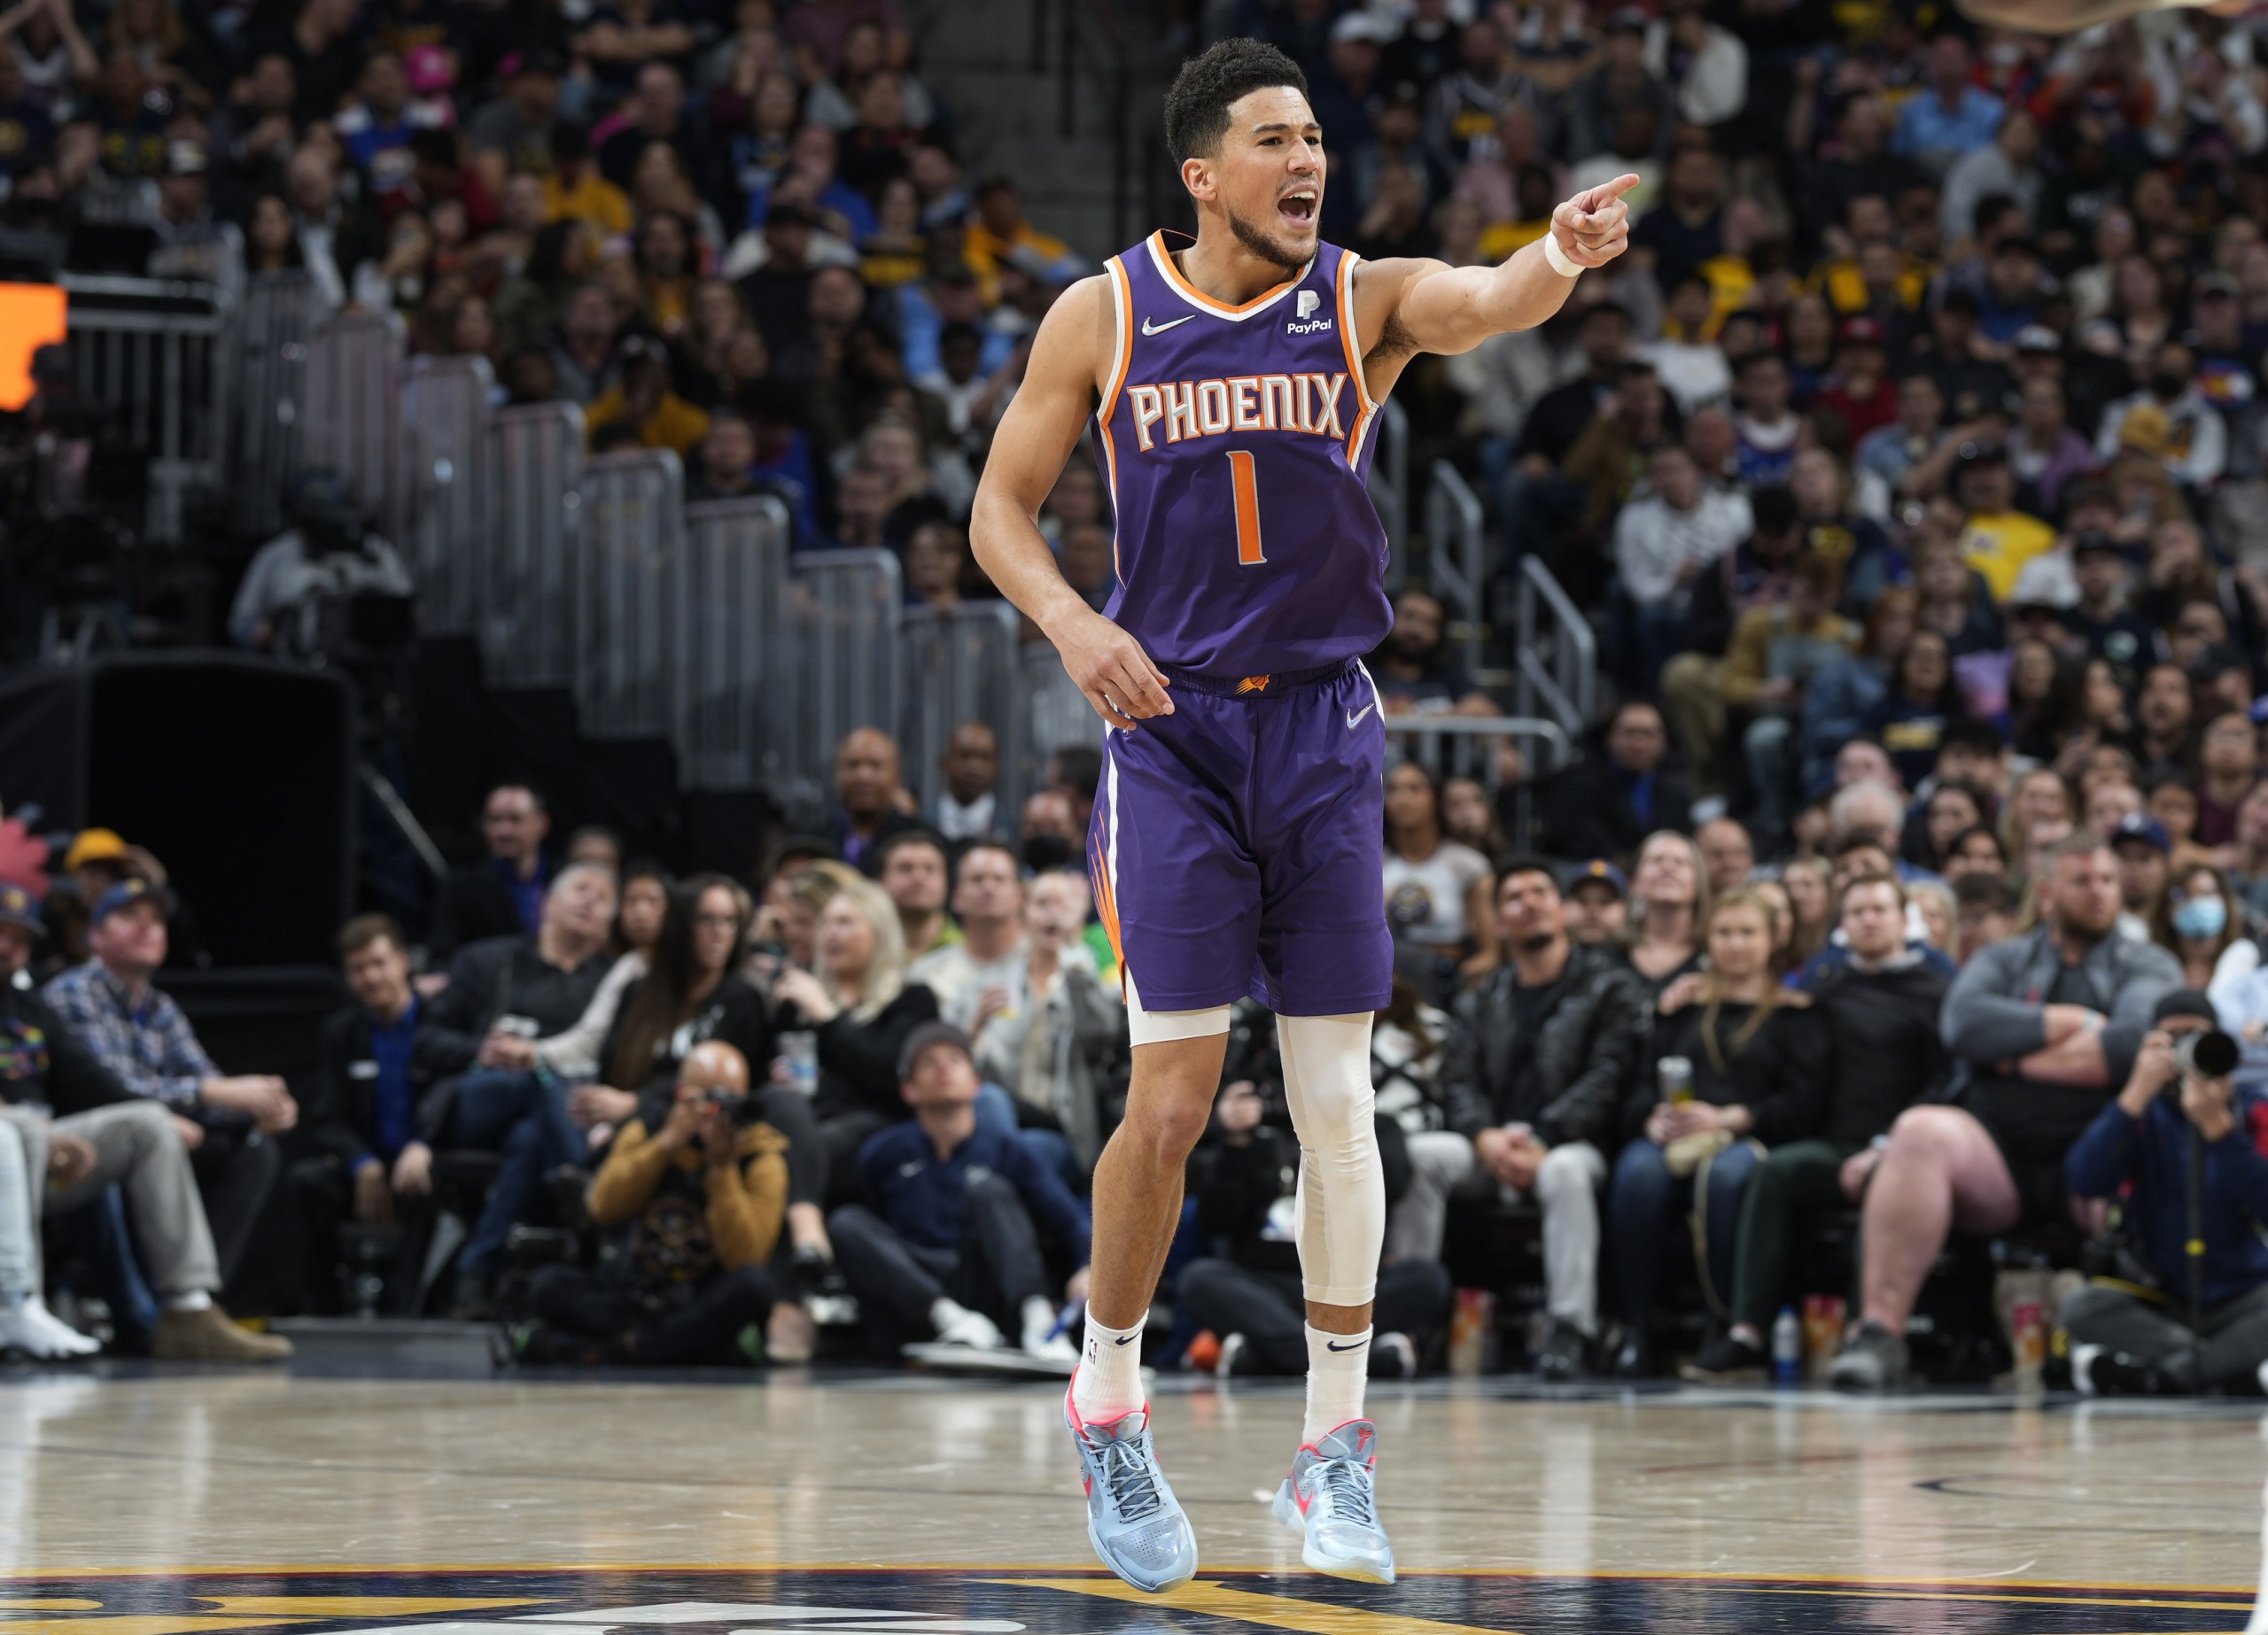 Phoenix Suns guard Devin Booker celebrates late in the second half of the team's NBA basketball game against the Denver Nuggets Thursday, March 24, 2022, in Denver. (AP Photo/David Zalubowski)